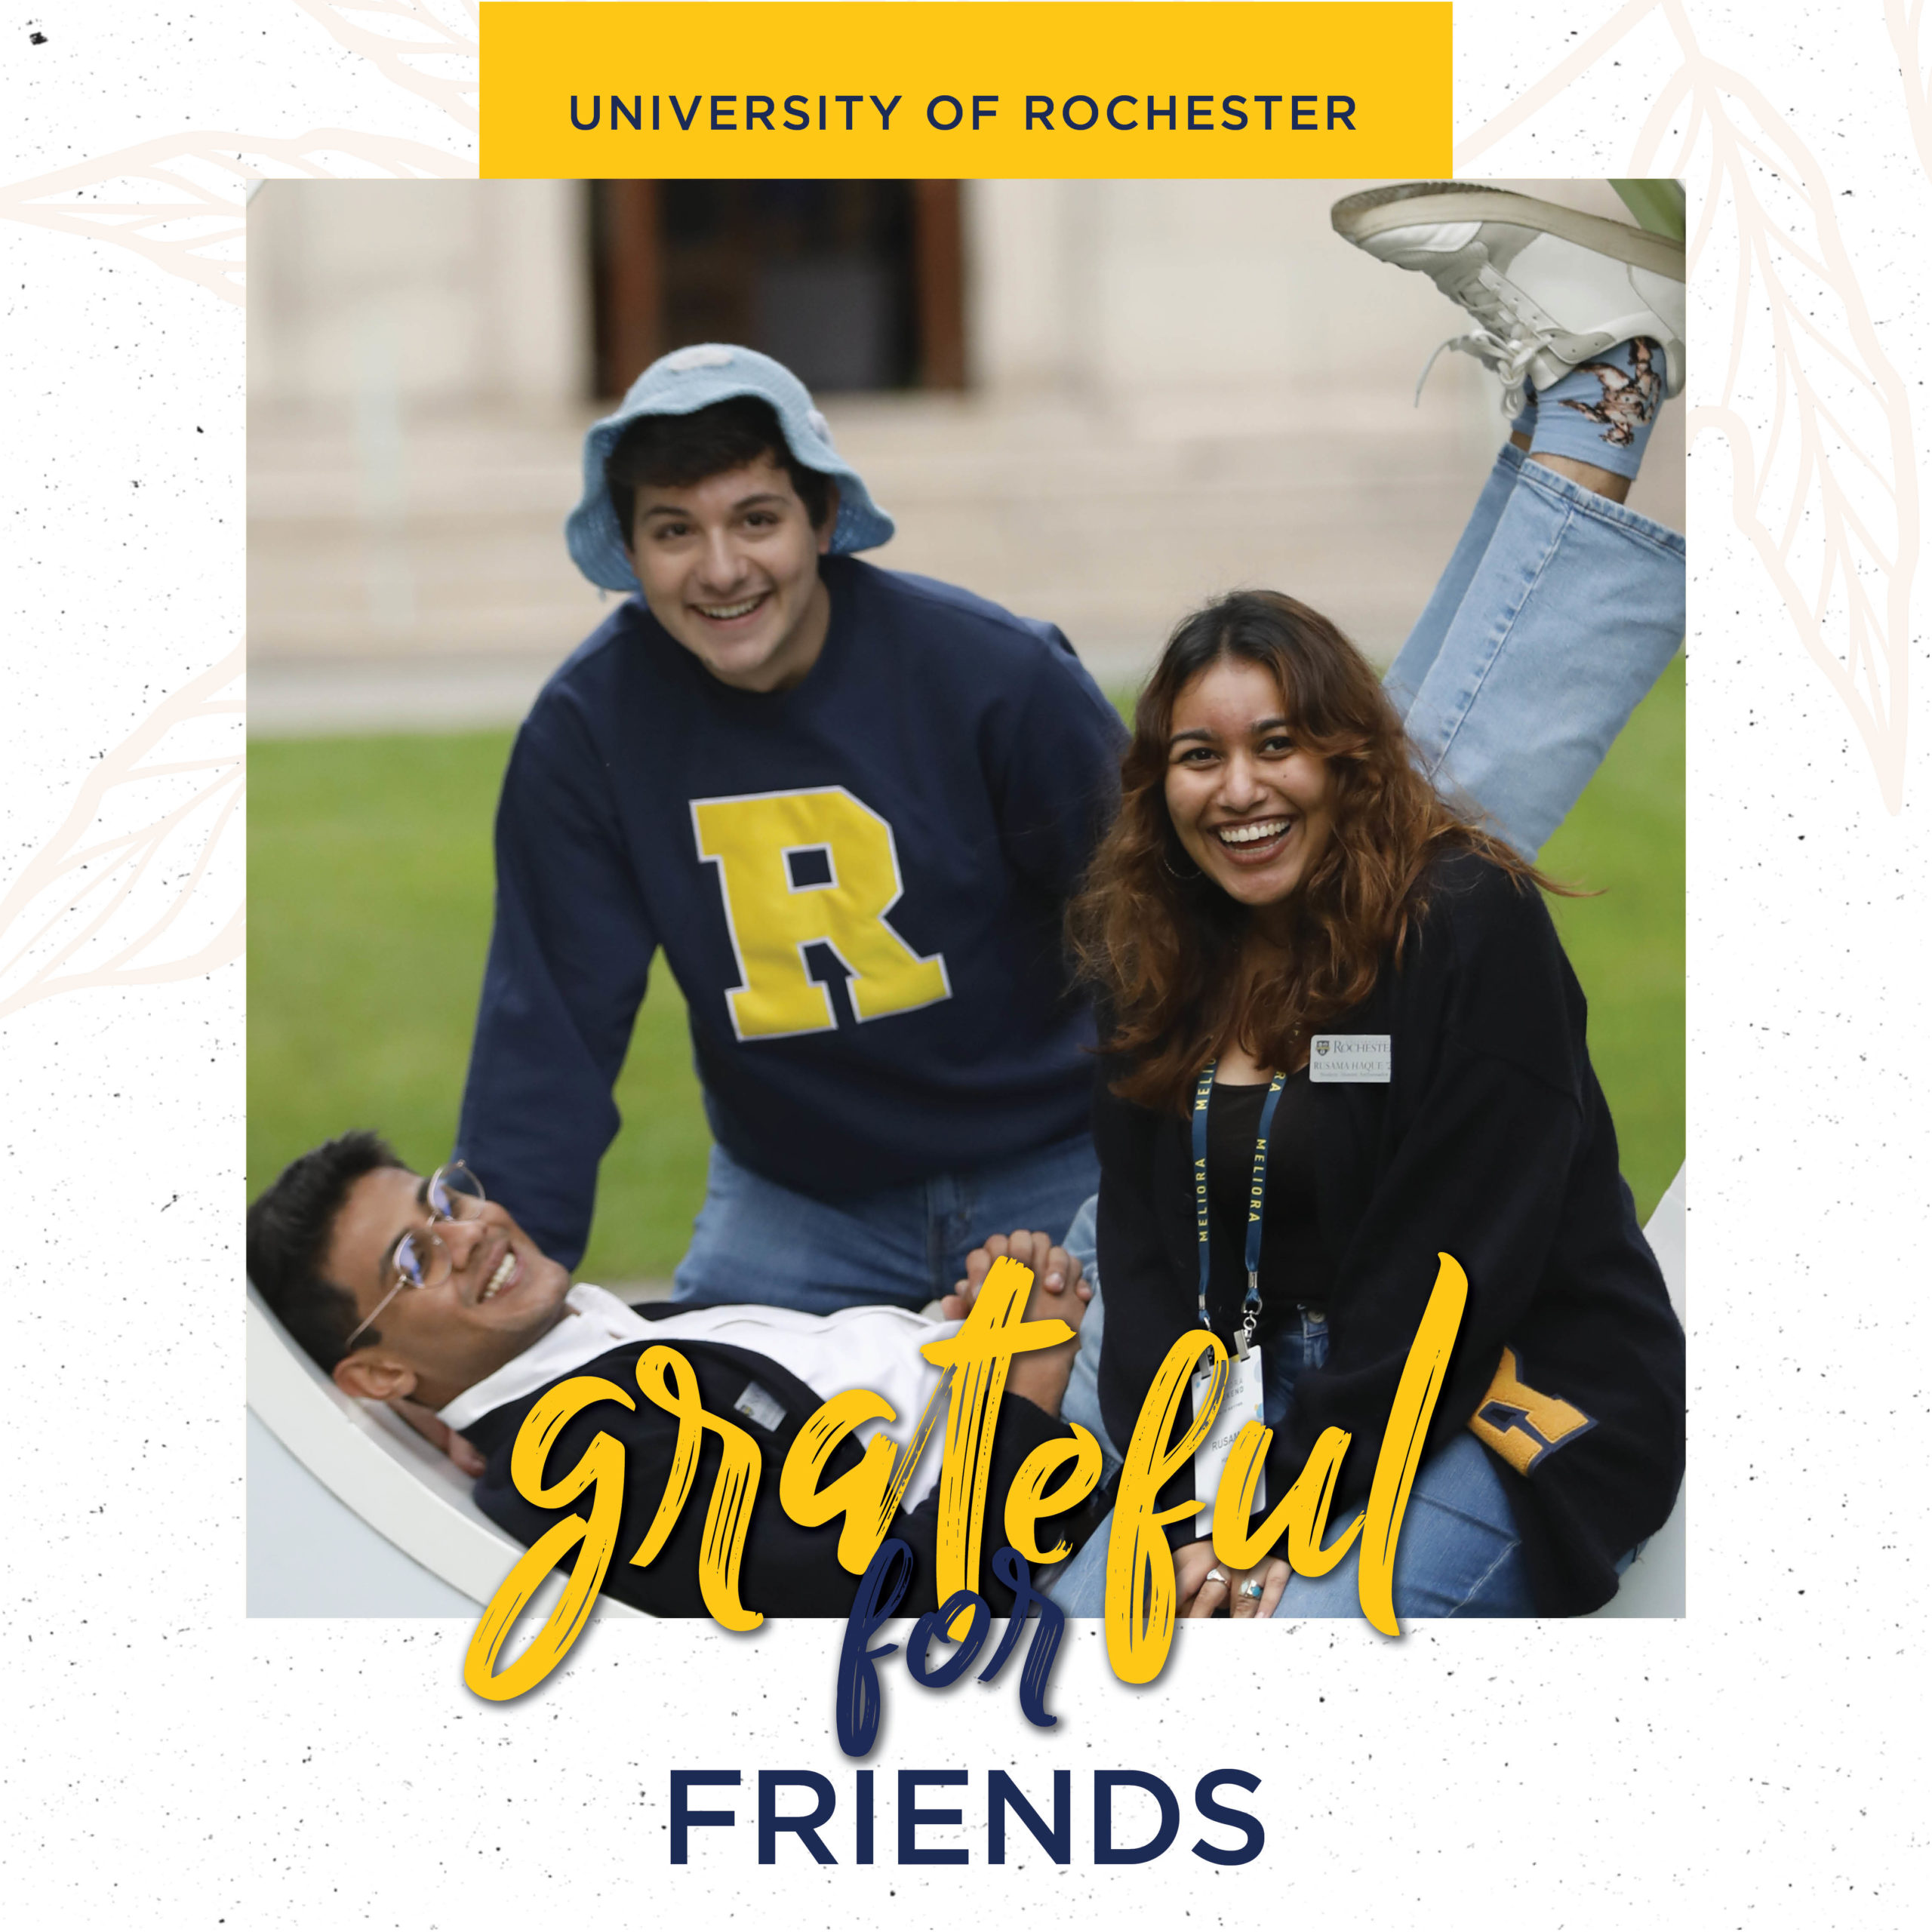 grateful for friends - three students seen smiling